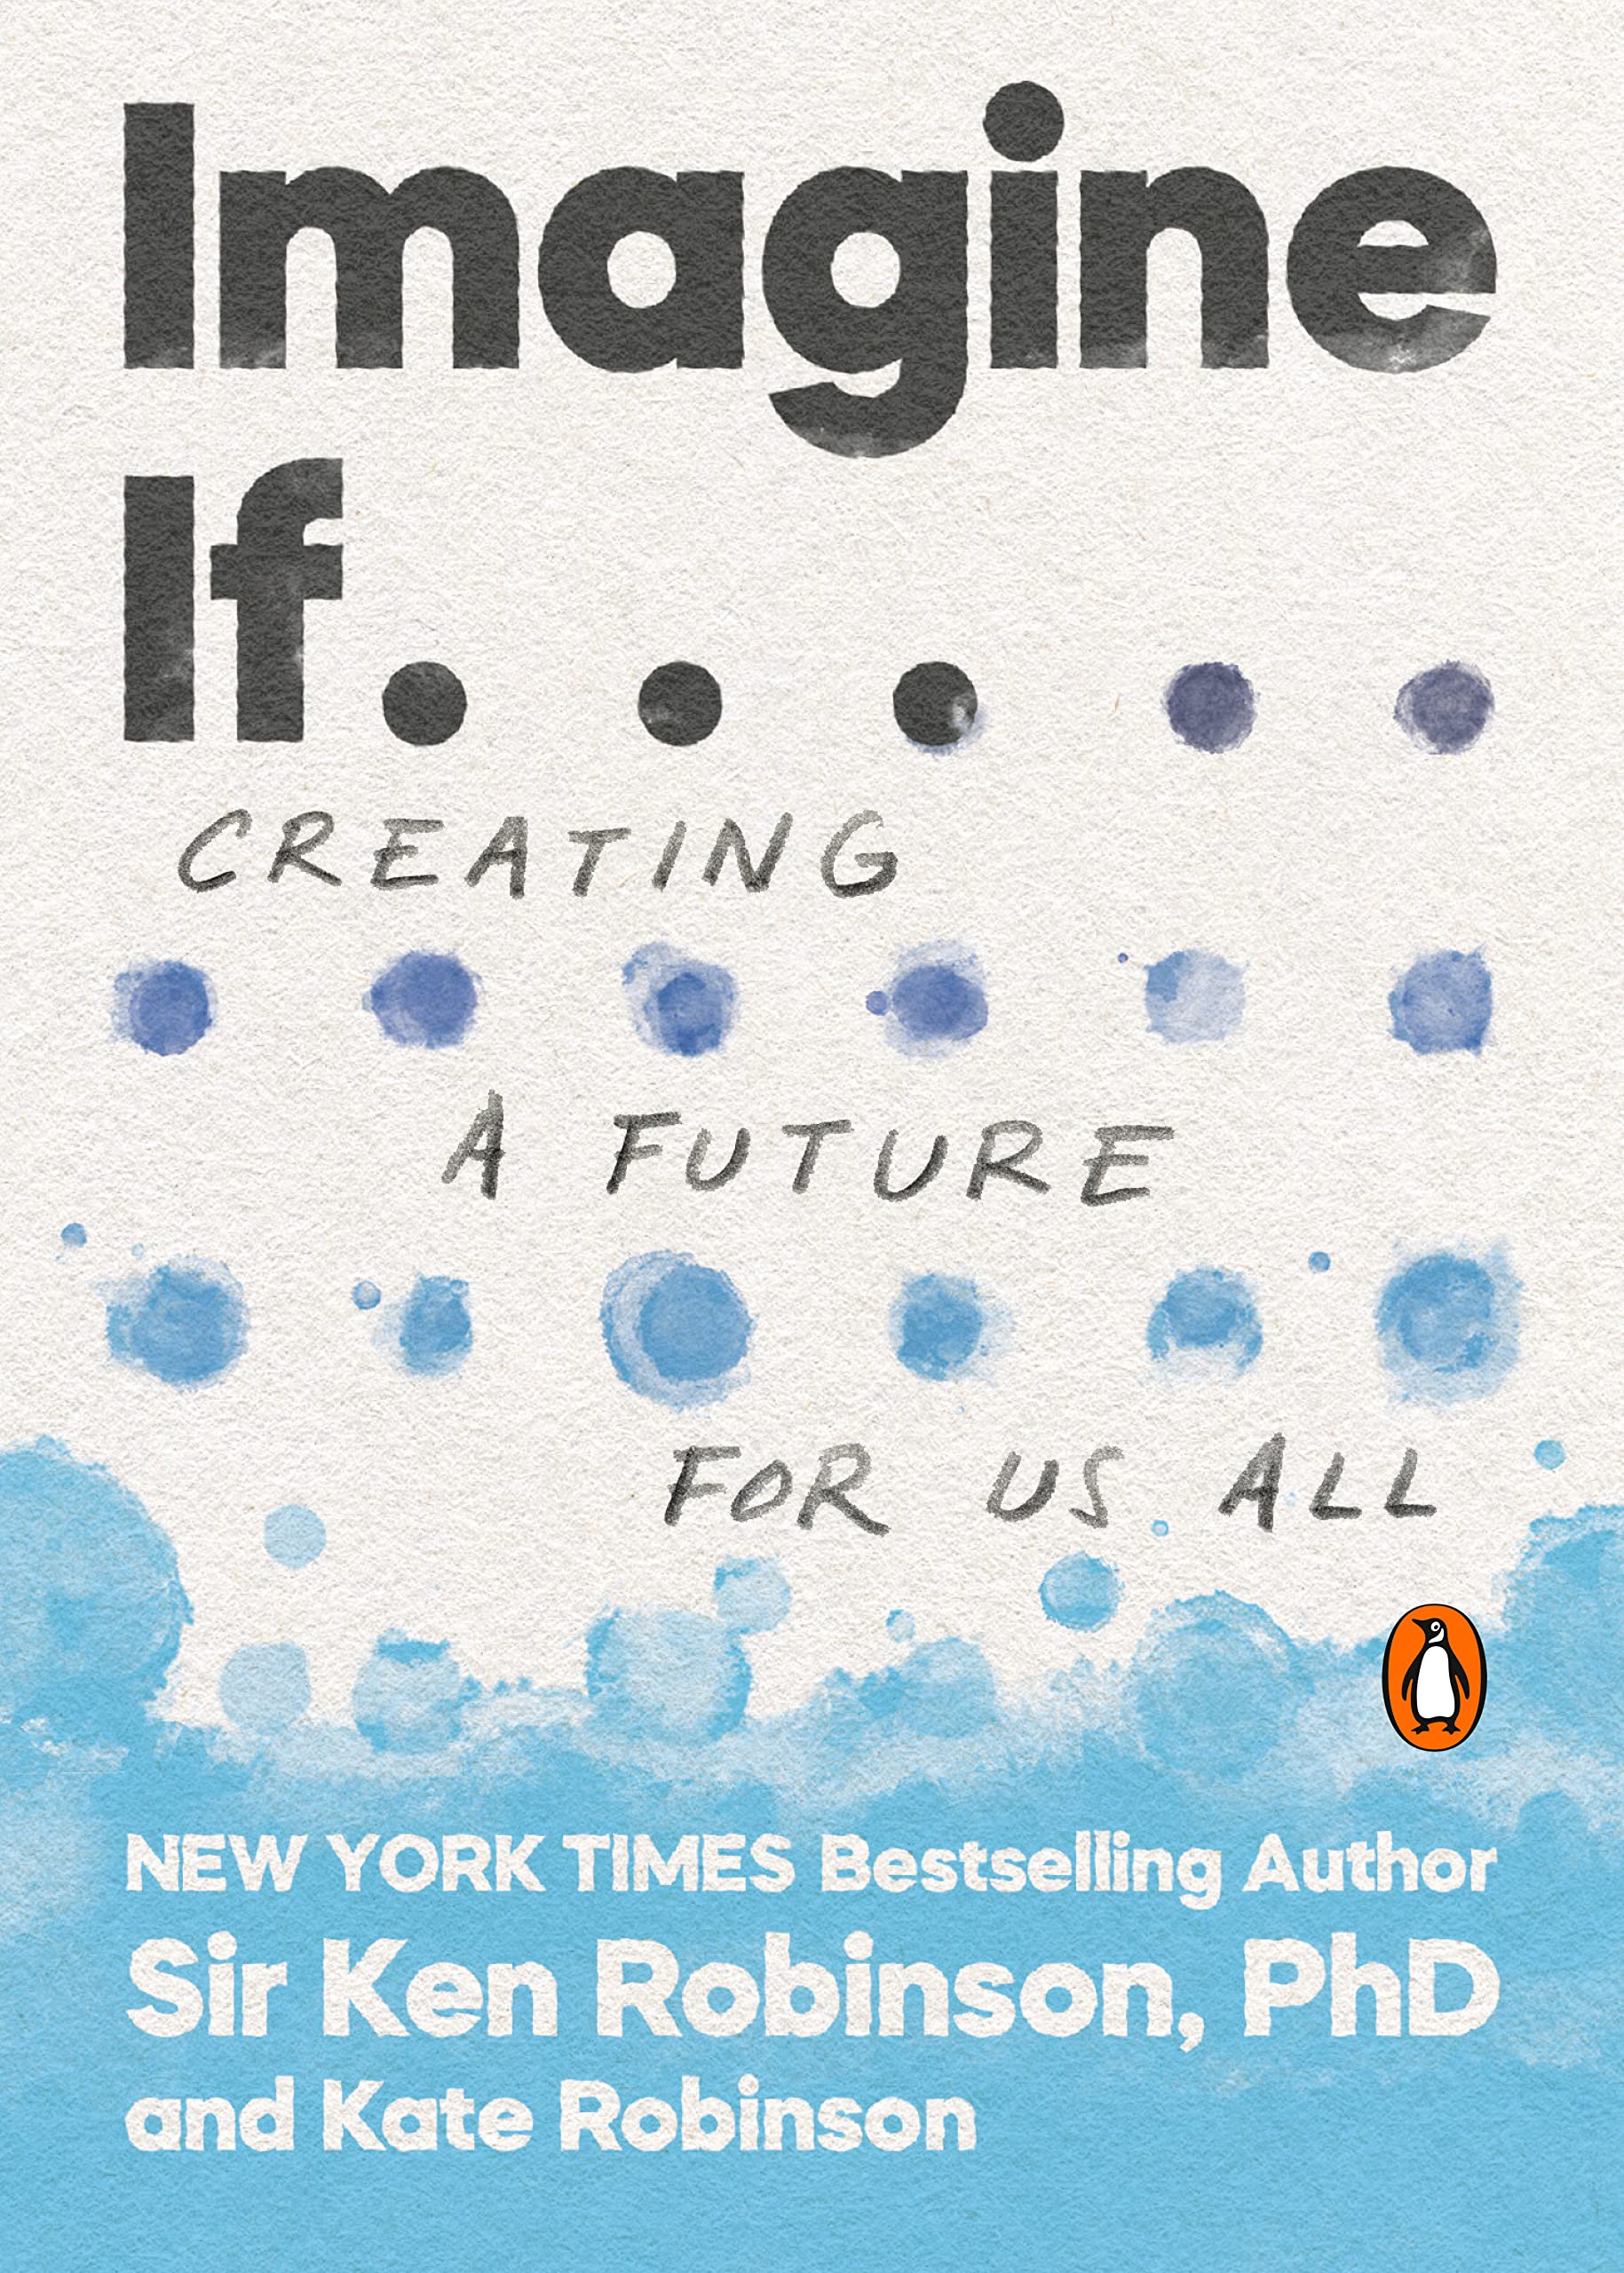 Imagine If…: Creating a Future for Us All